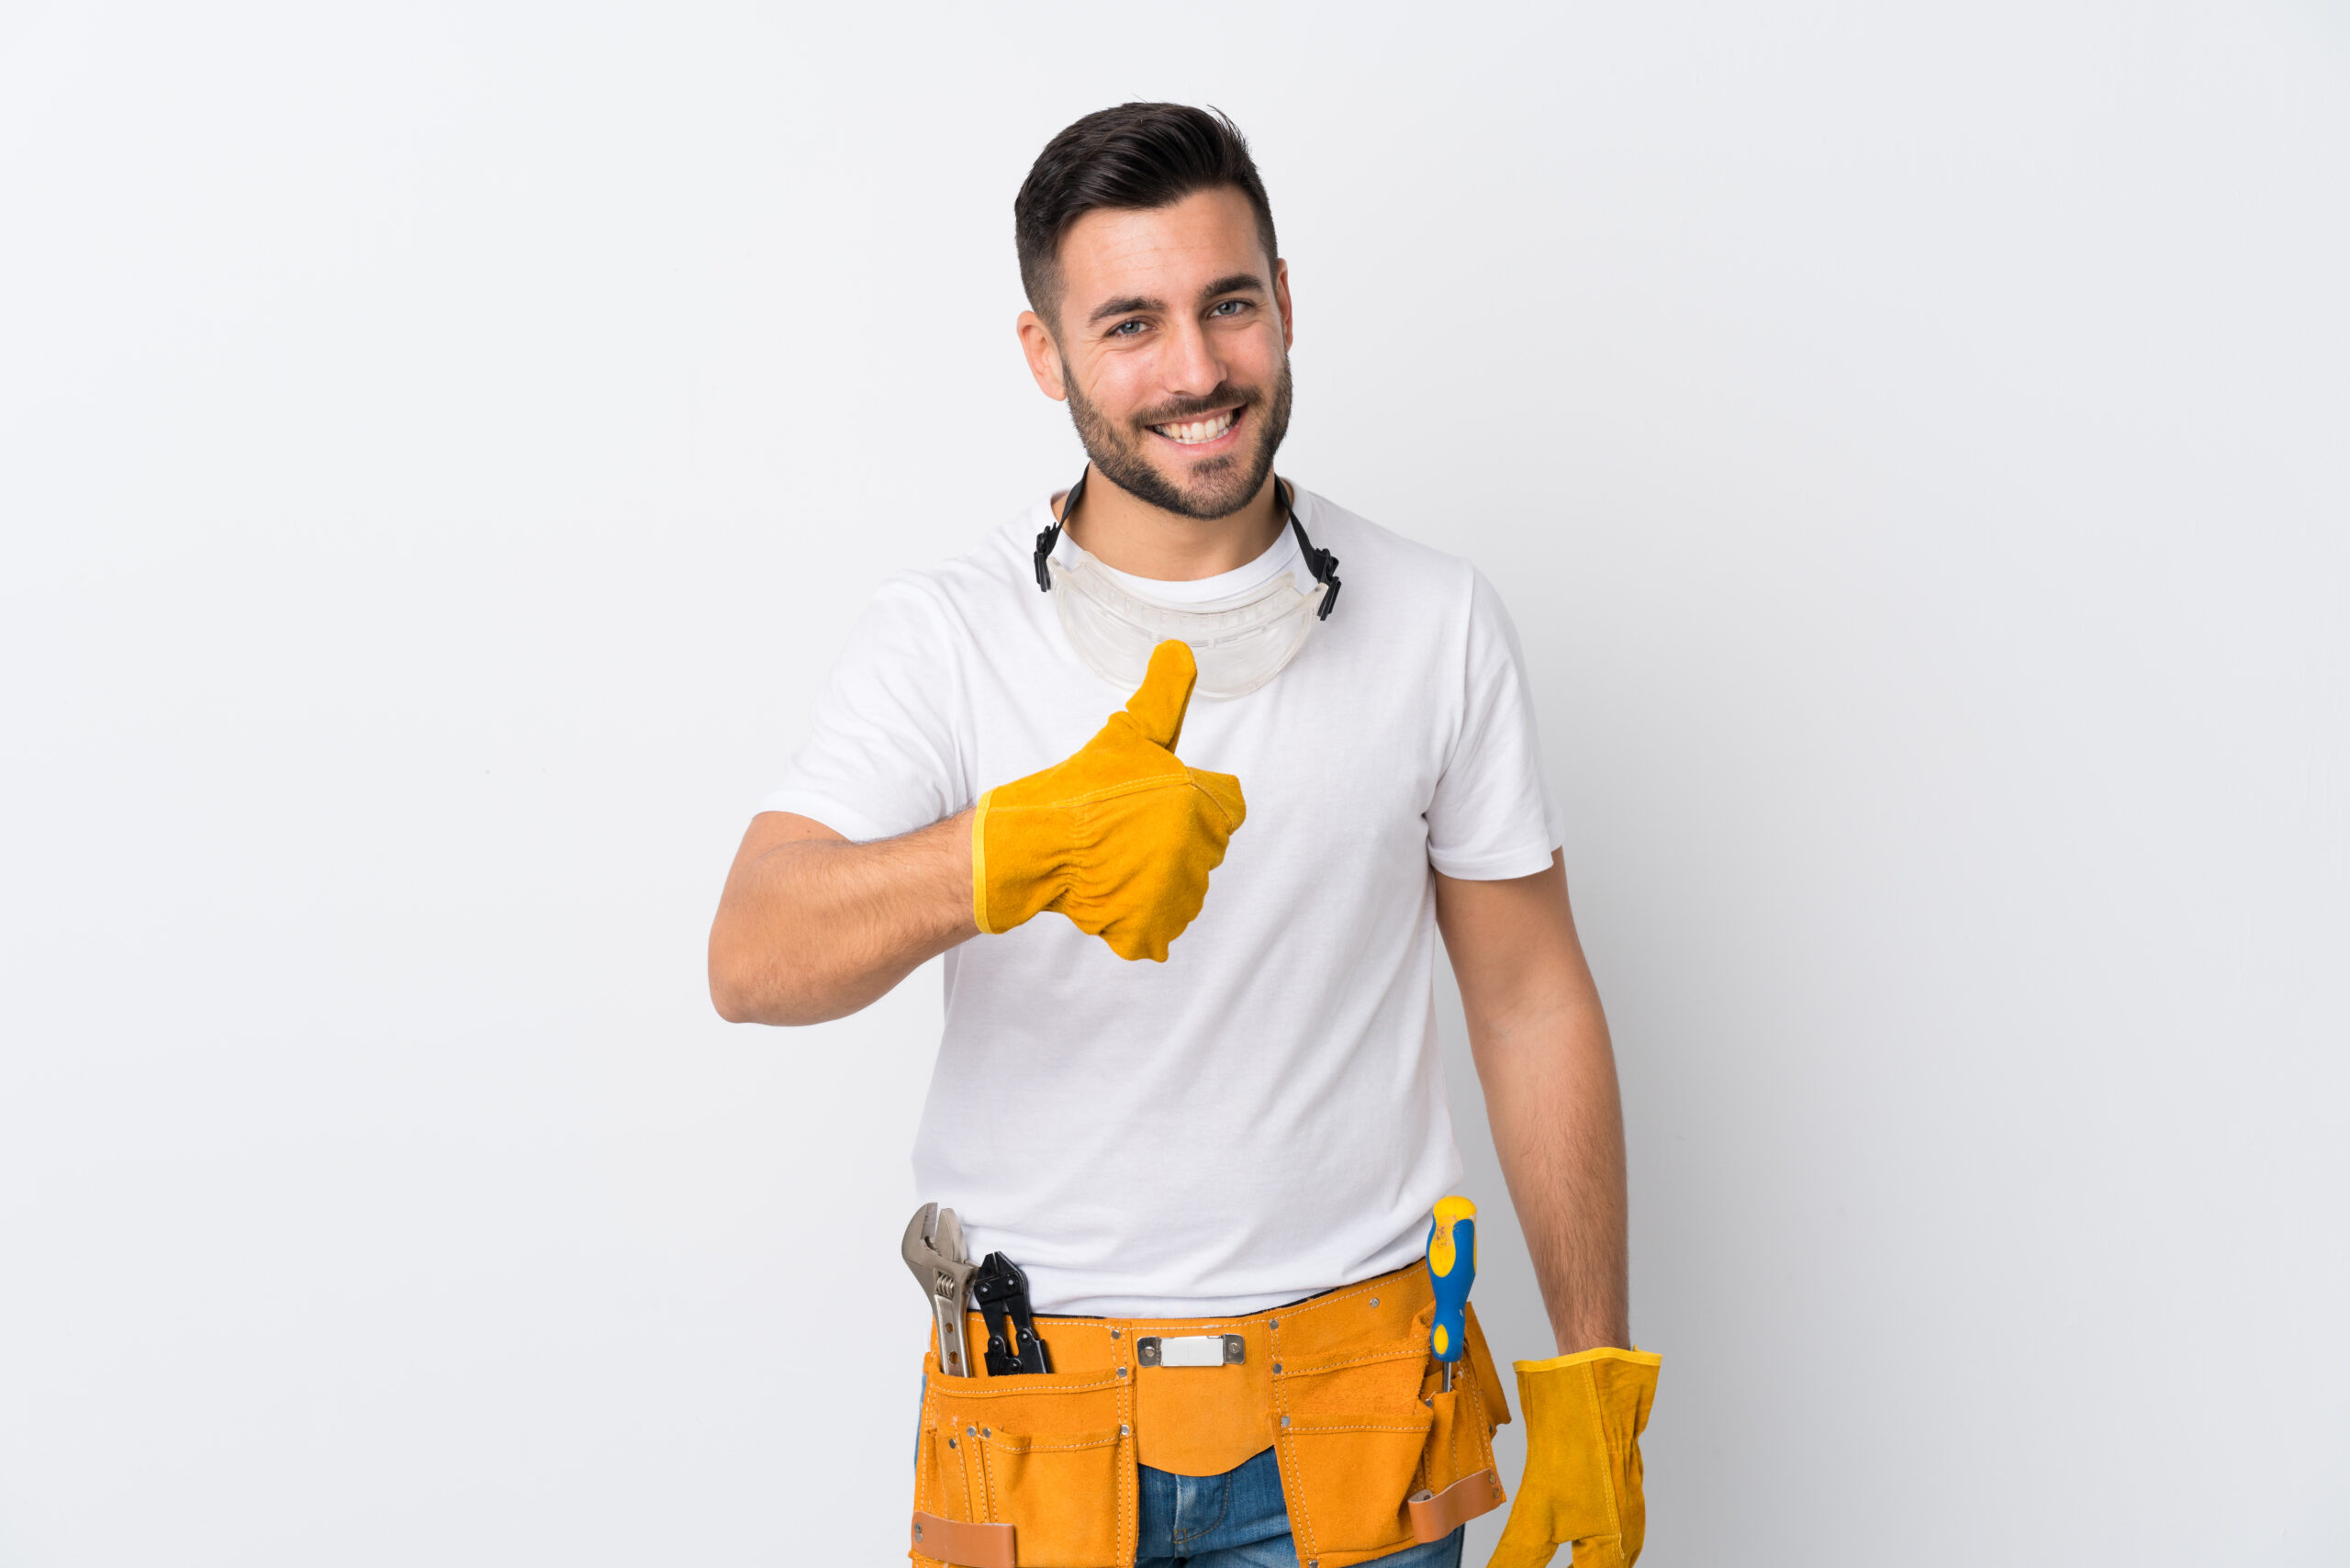 Does Handyman Play A Role In Home Shifting And Repair